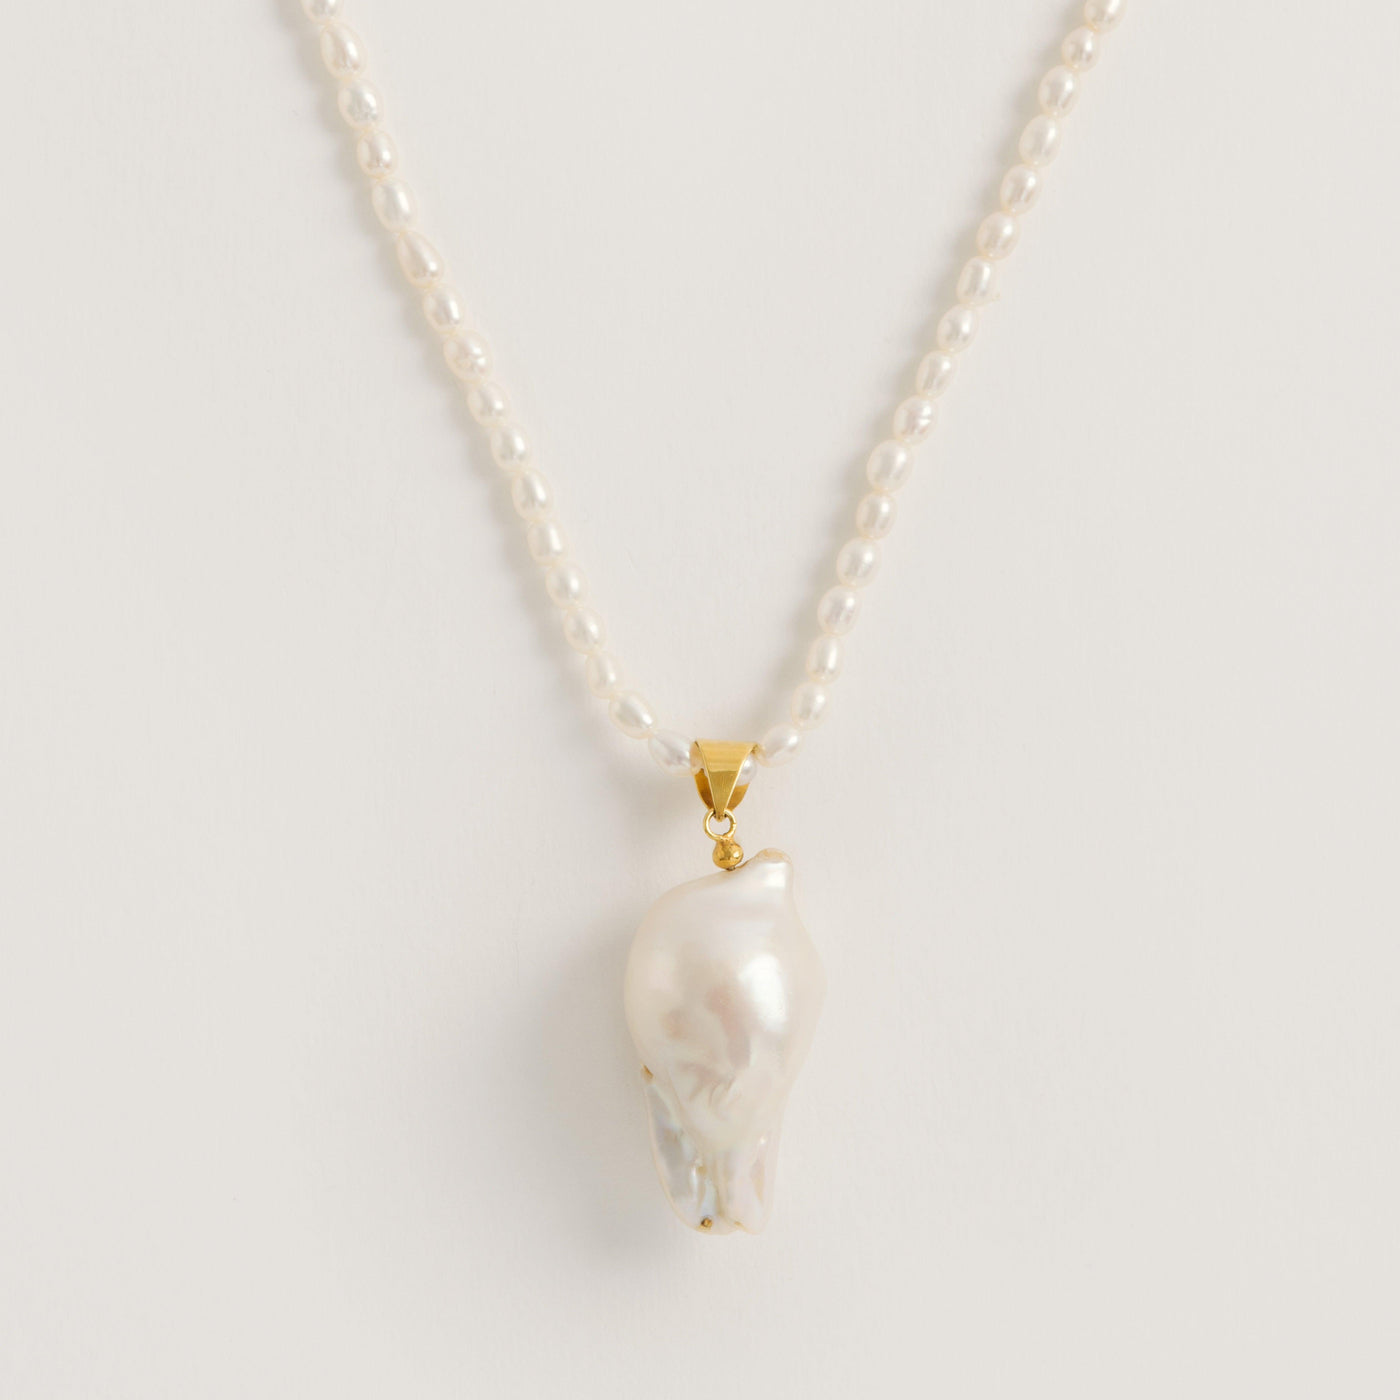 Rice Pearl Necklace with Large Baroque Pearl Pendant - Freya Rose Pearl Jewellery